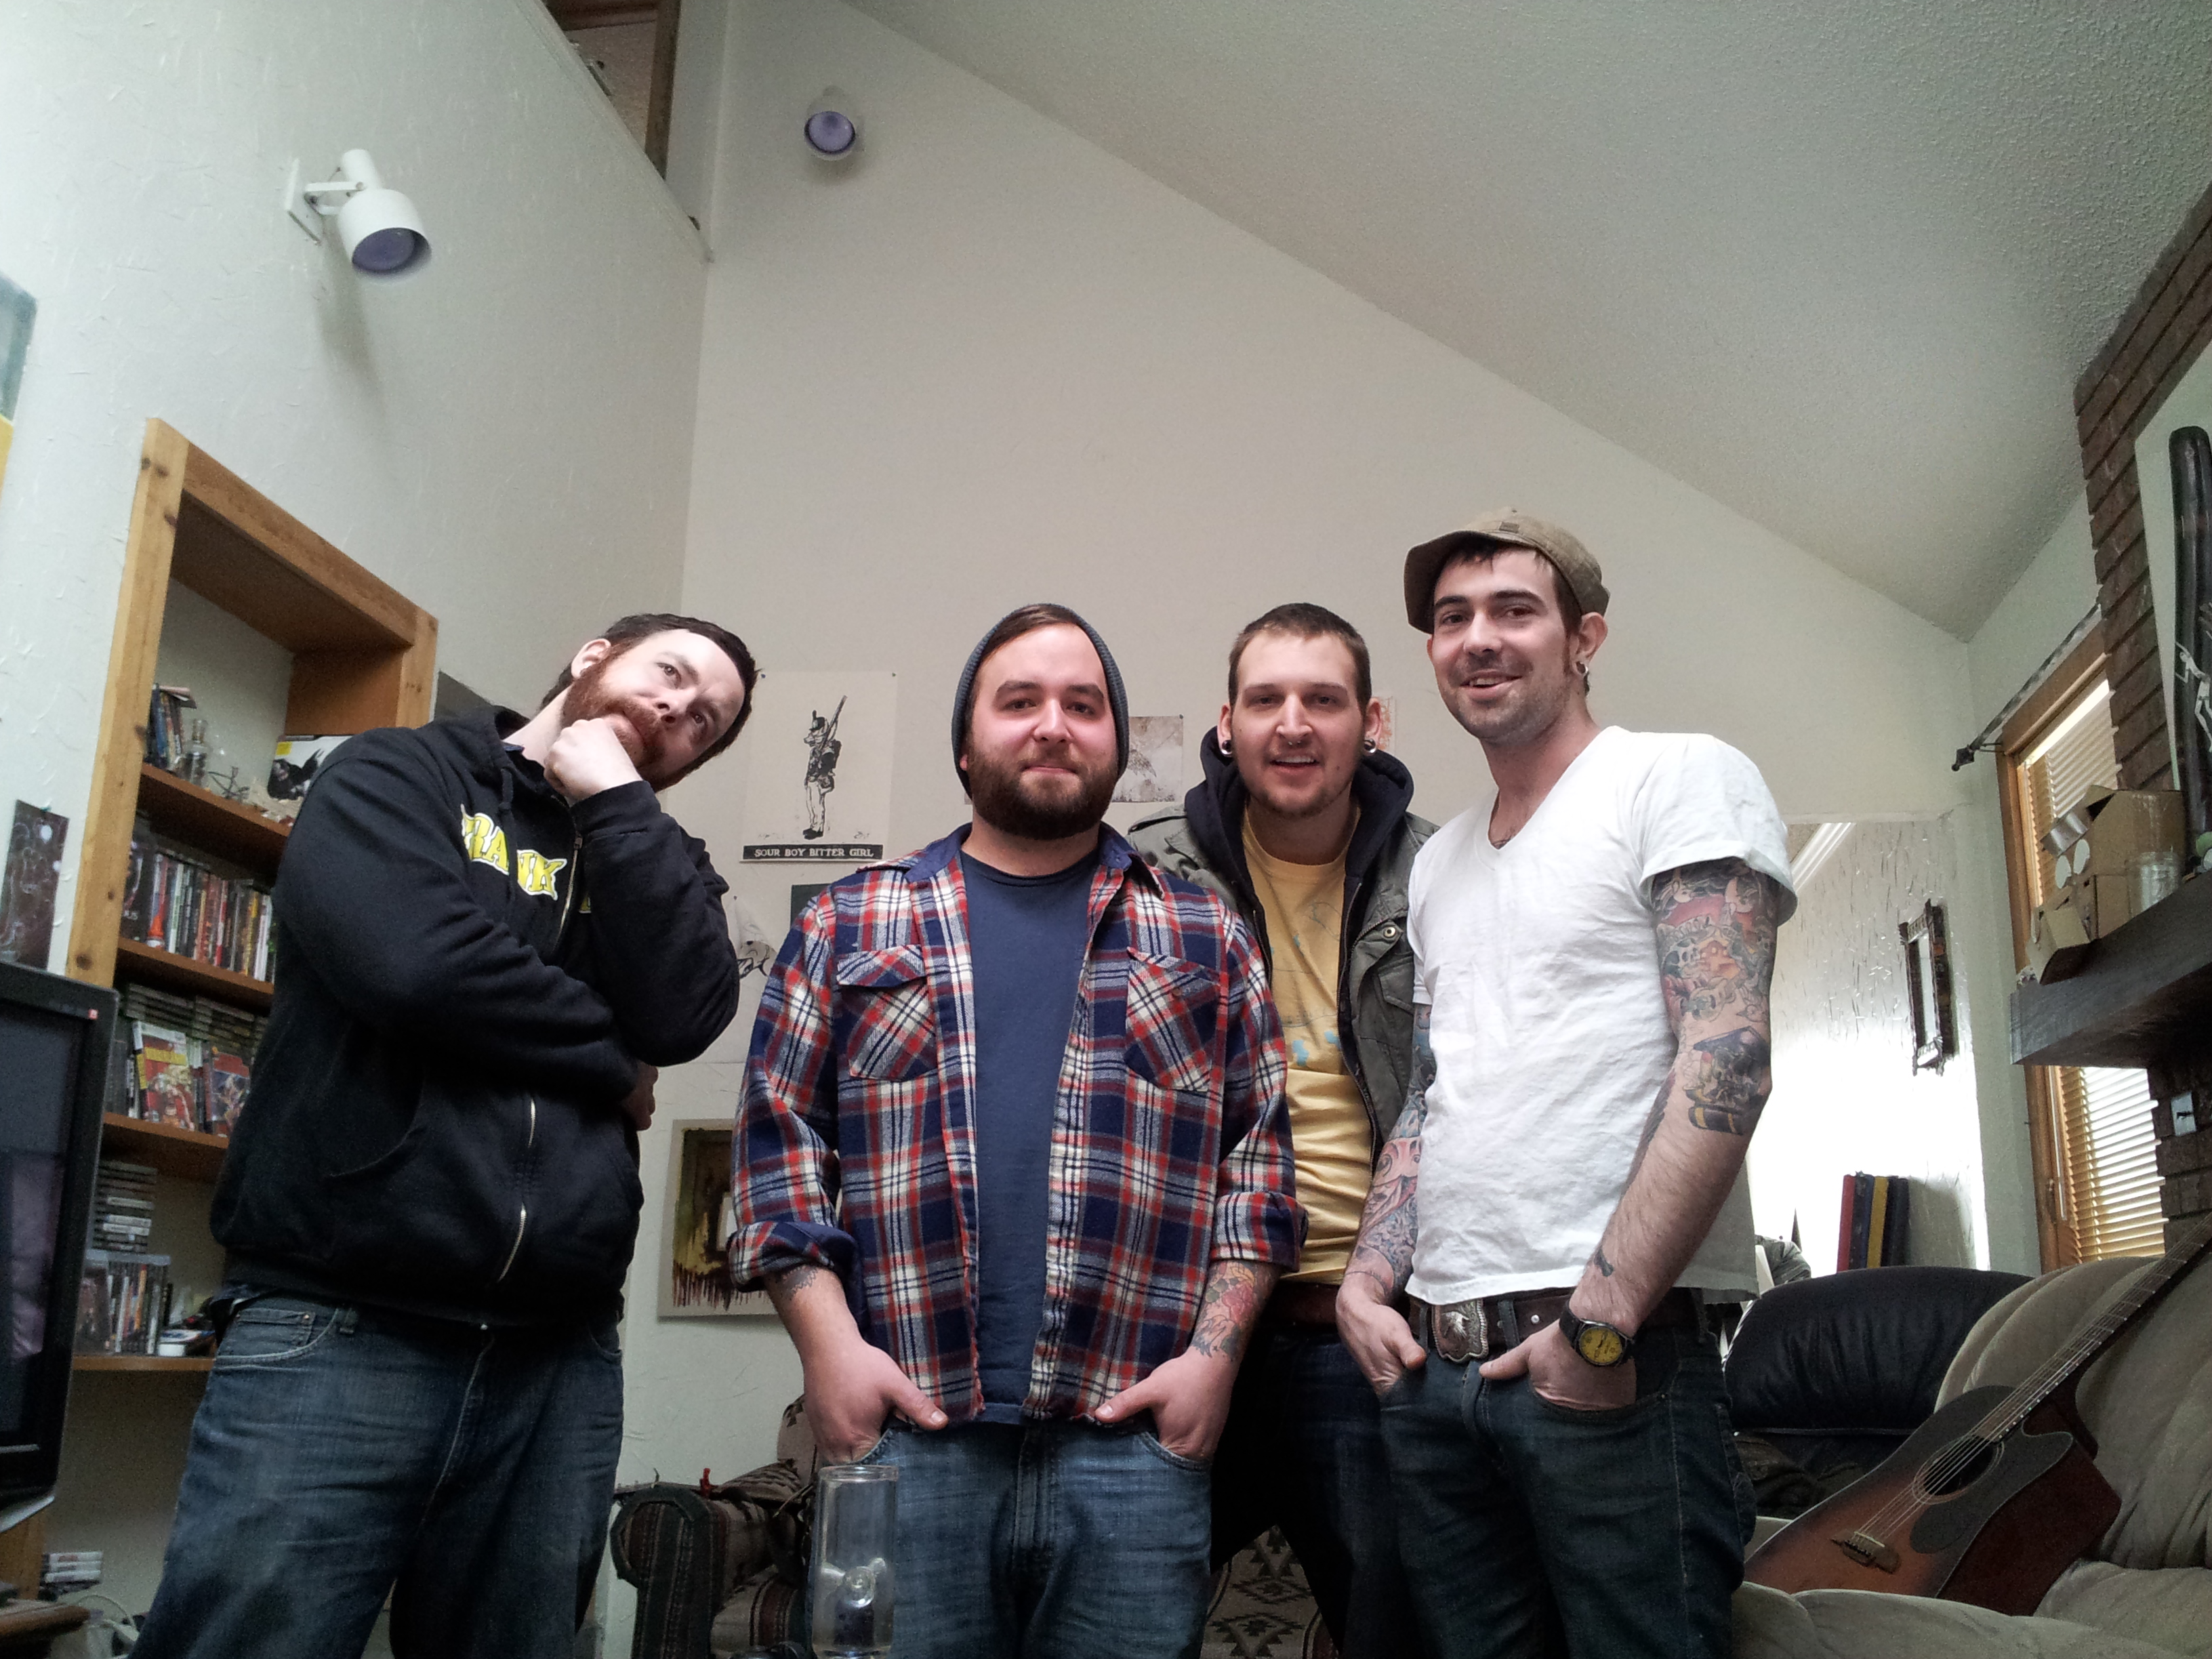 Hanging out with Arliss Nancy (Kyle "GB" Kyle Oppold, Chris Love, & Cory Call) at the Chowder House Love Emporium.